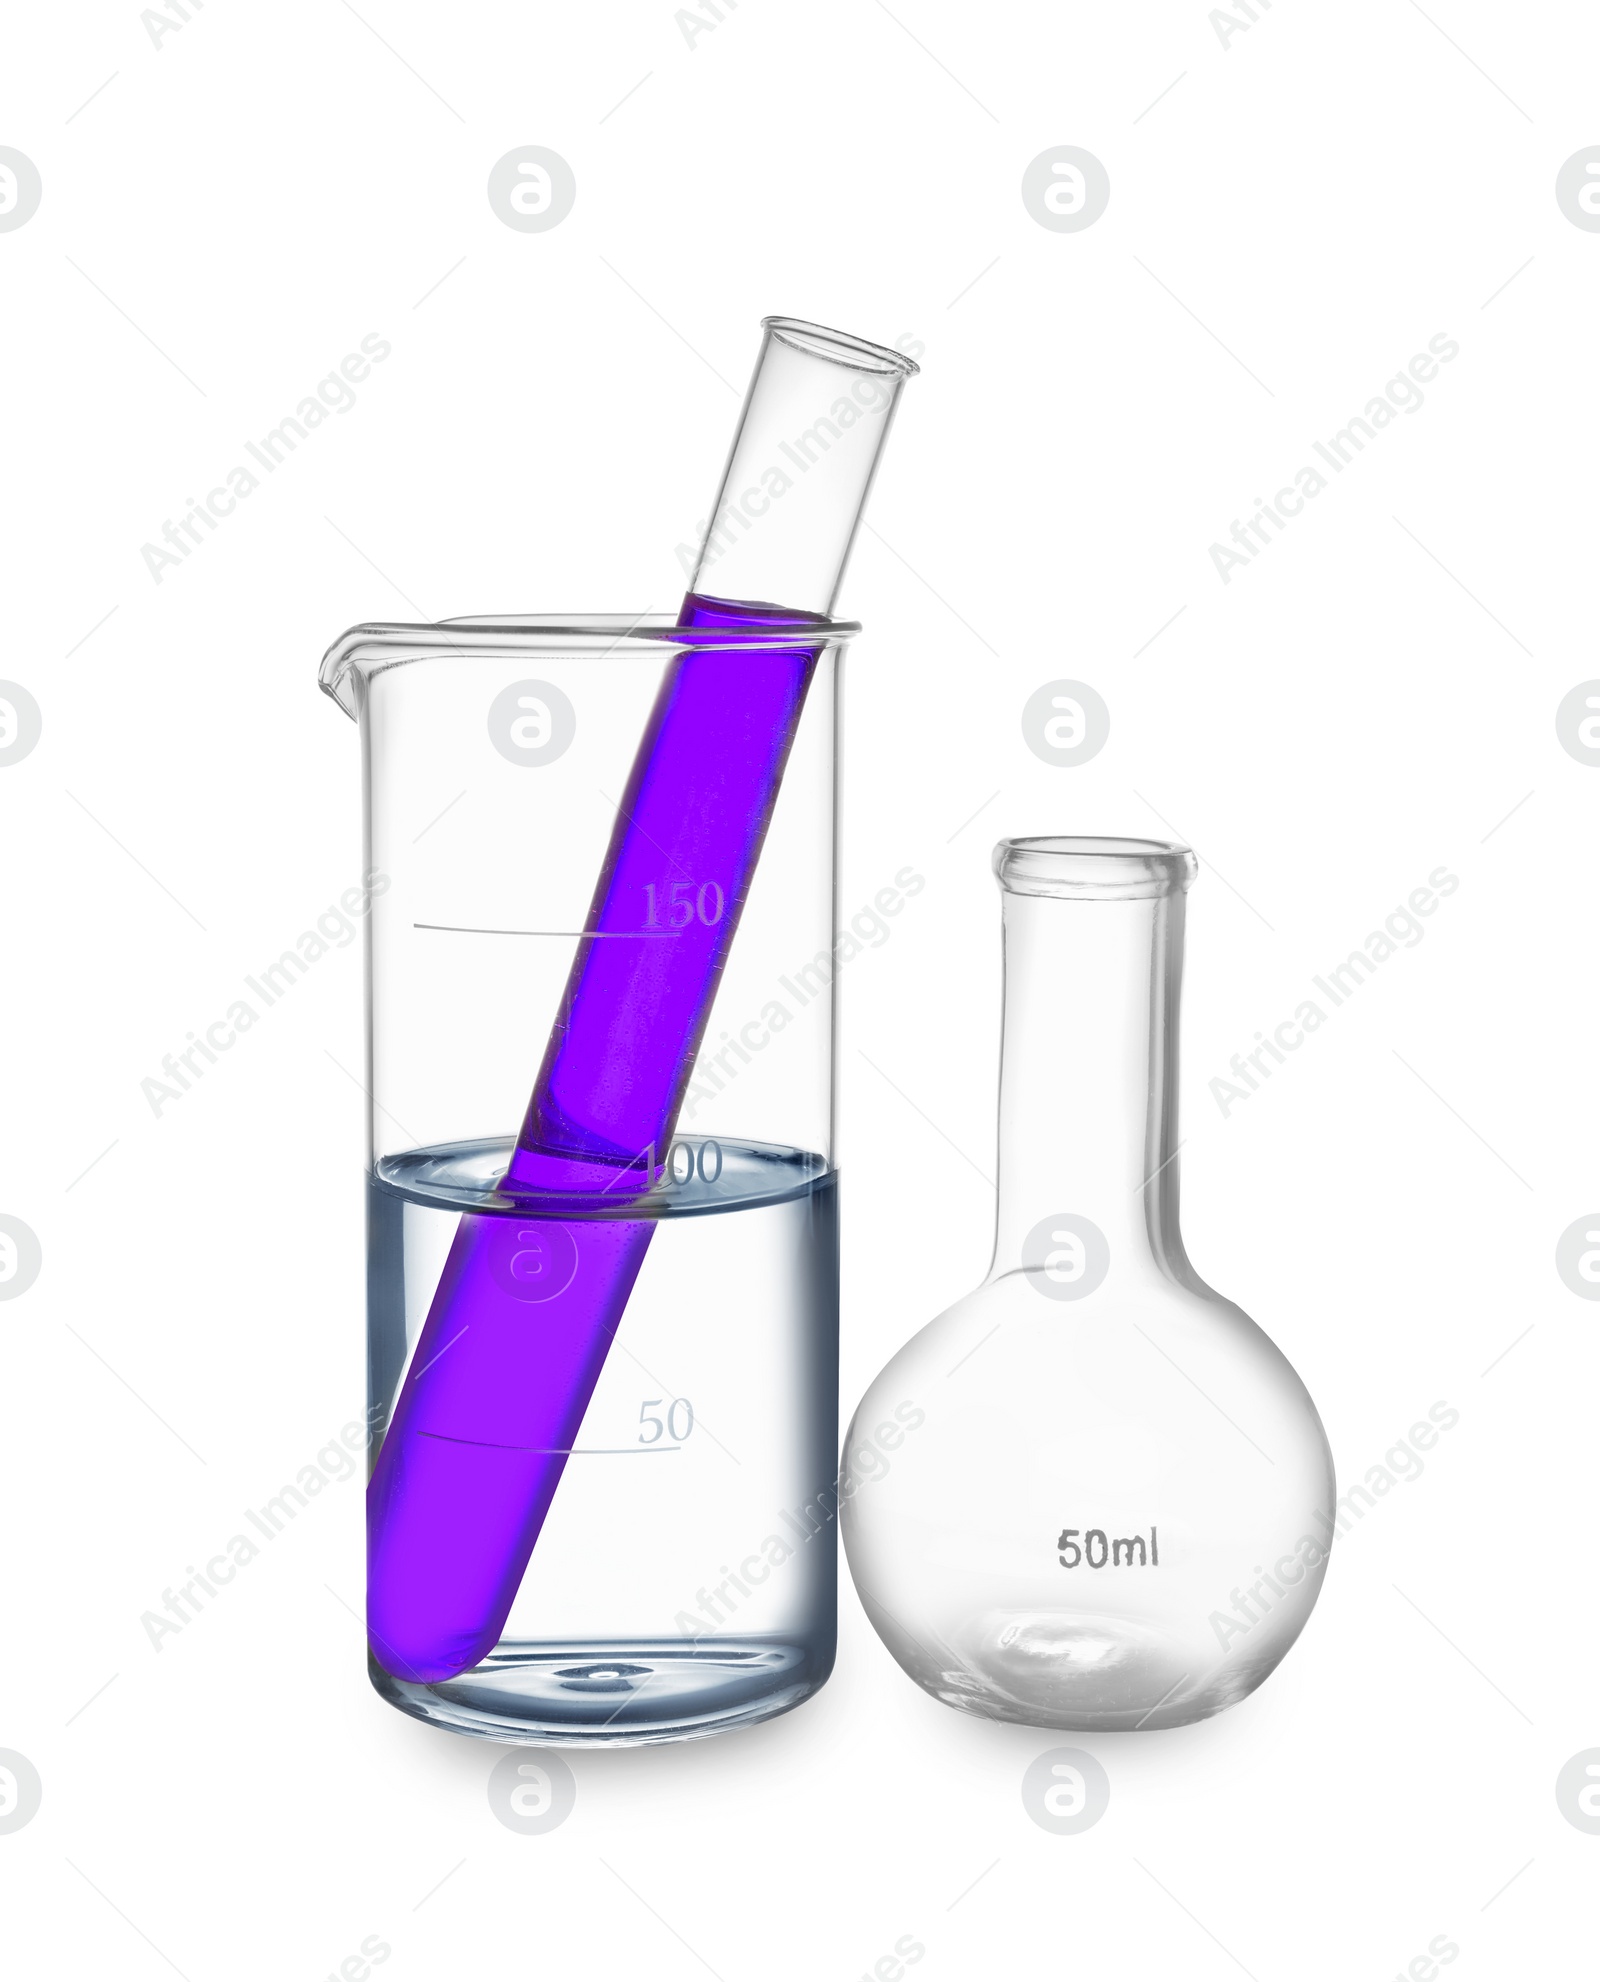 Image of Glass beaker, flask and test tube with purple liquid isolated on white